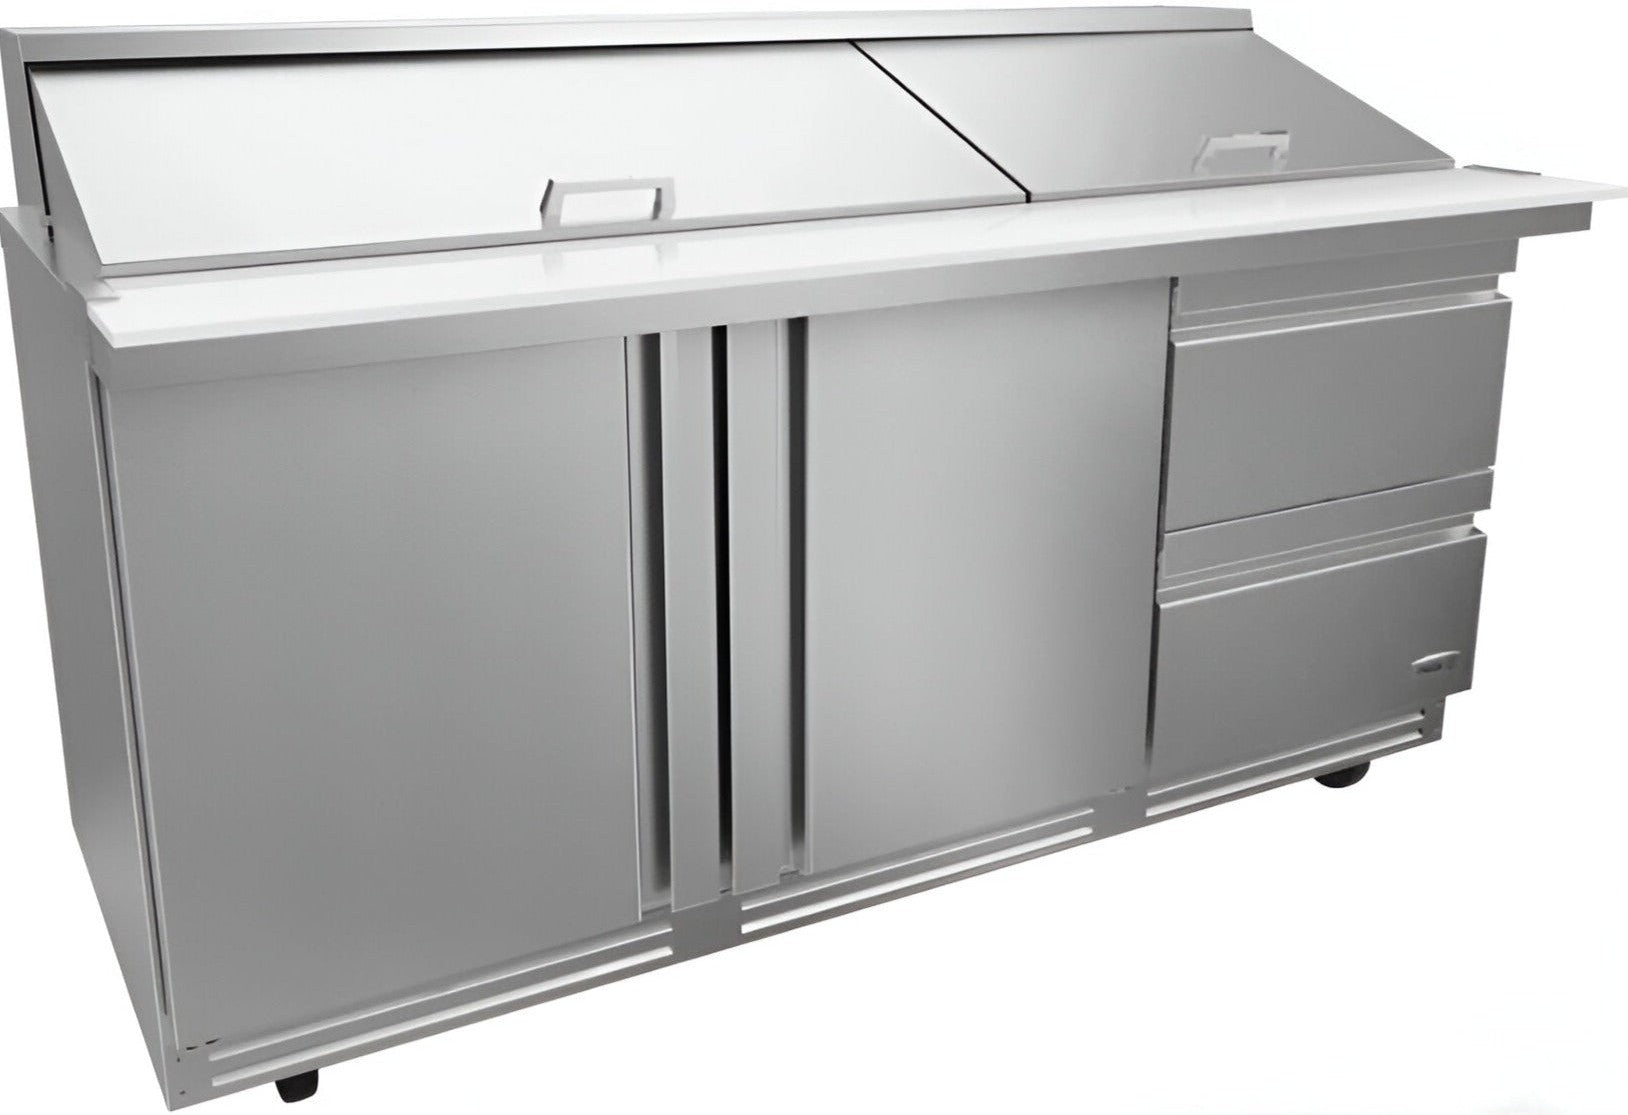 Fagor - FMT Series 115 V, 72" Double Door Mega Top Refrigerated Salad/Sandwich Prep Table With Two Drawer - FMT-72-30-D2-N